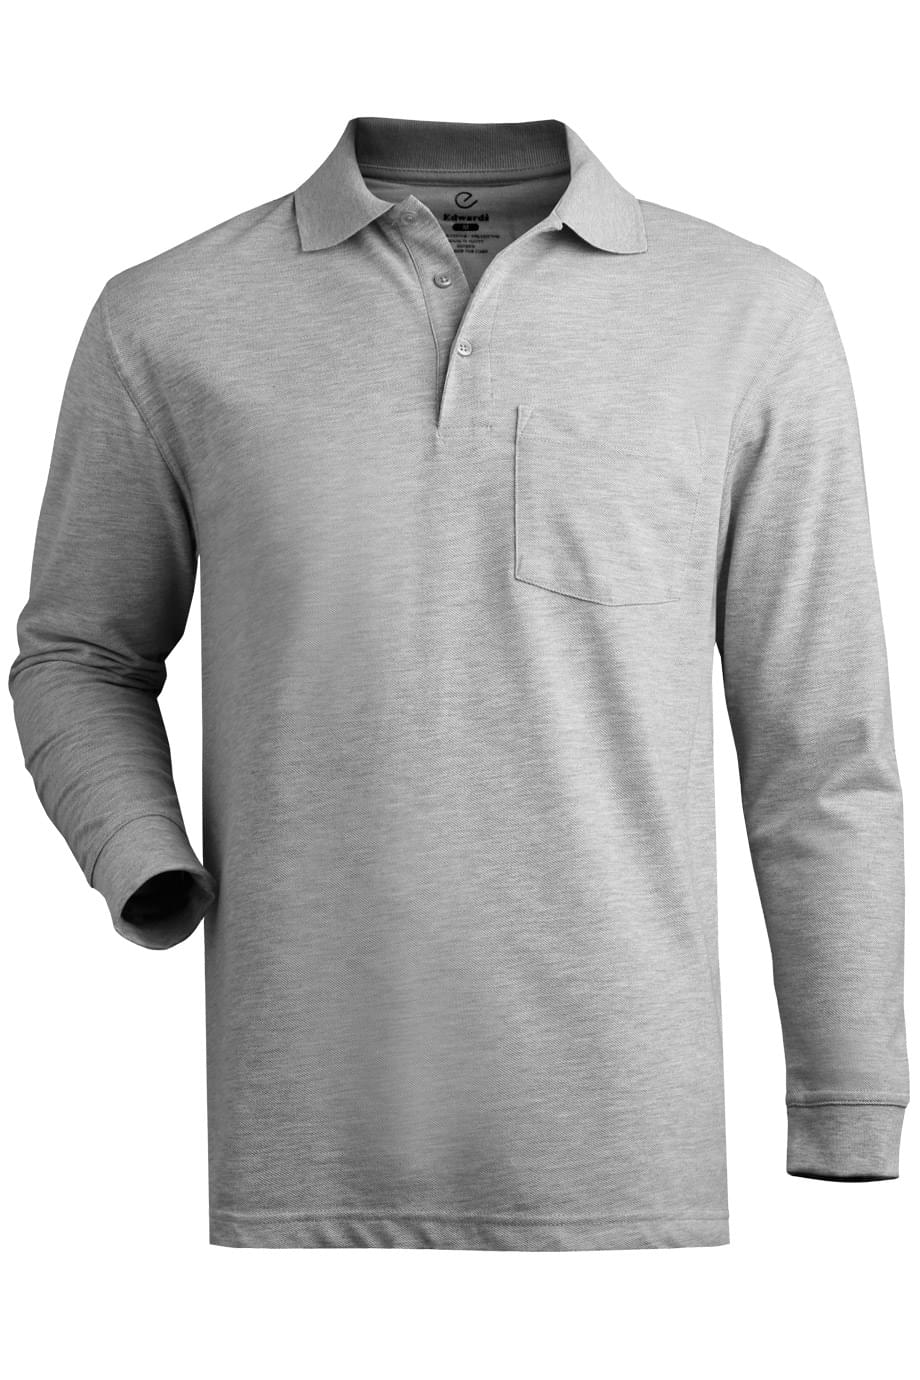 SOFT TOUCH PIQUE POLO WITH POCKET